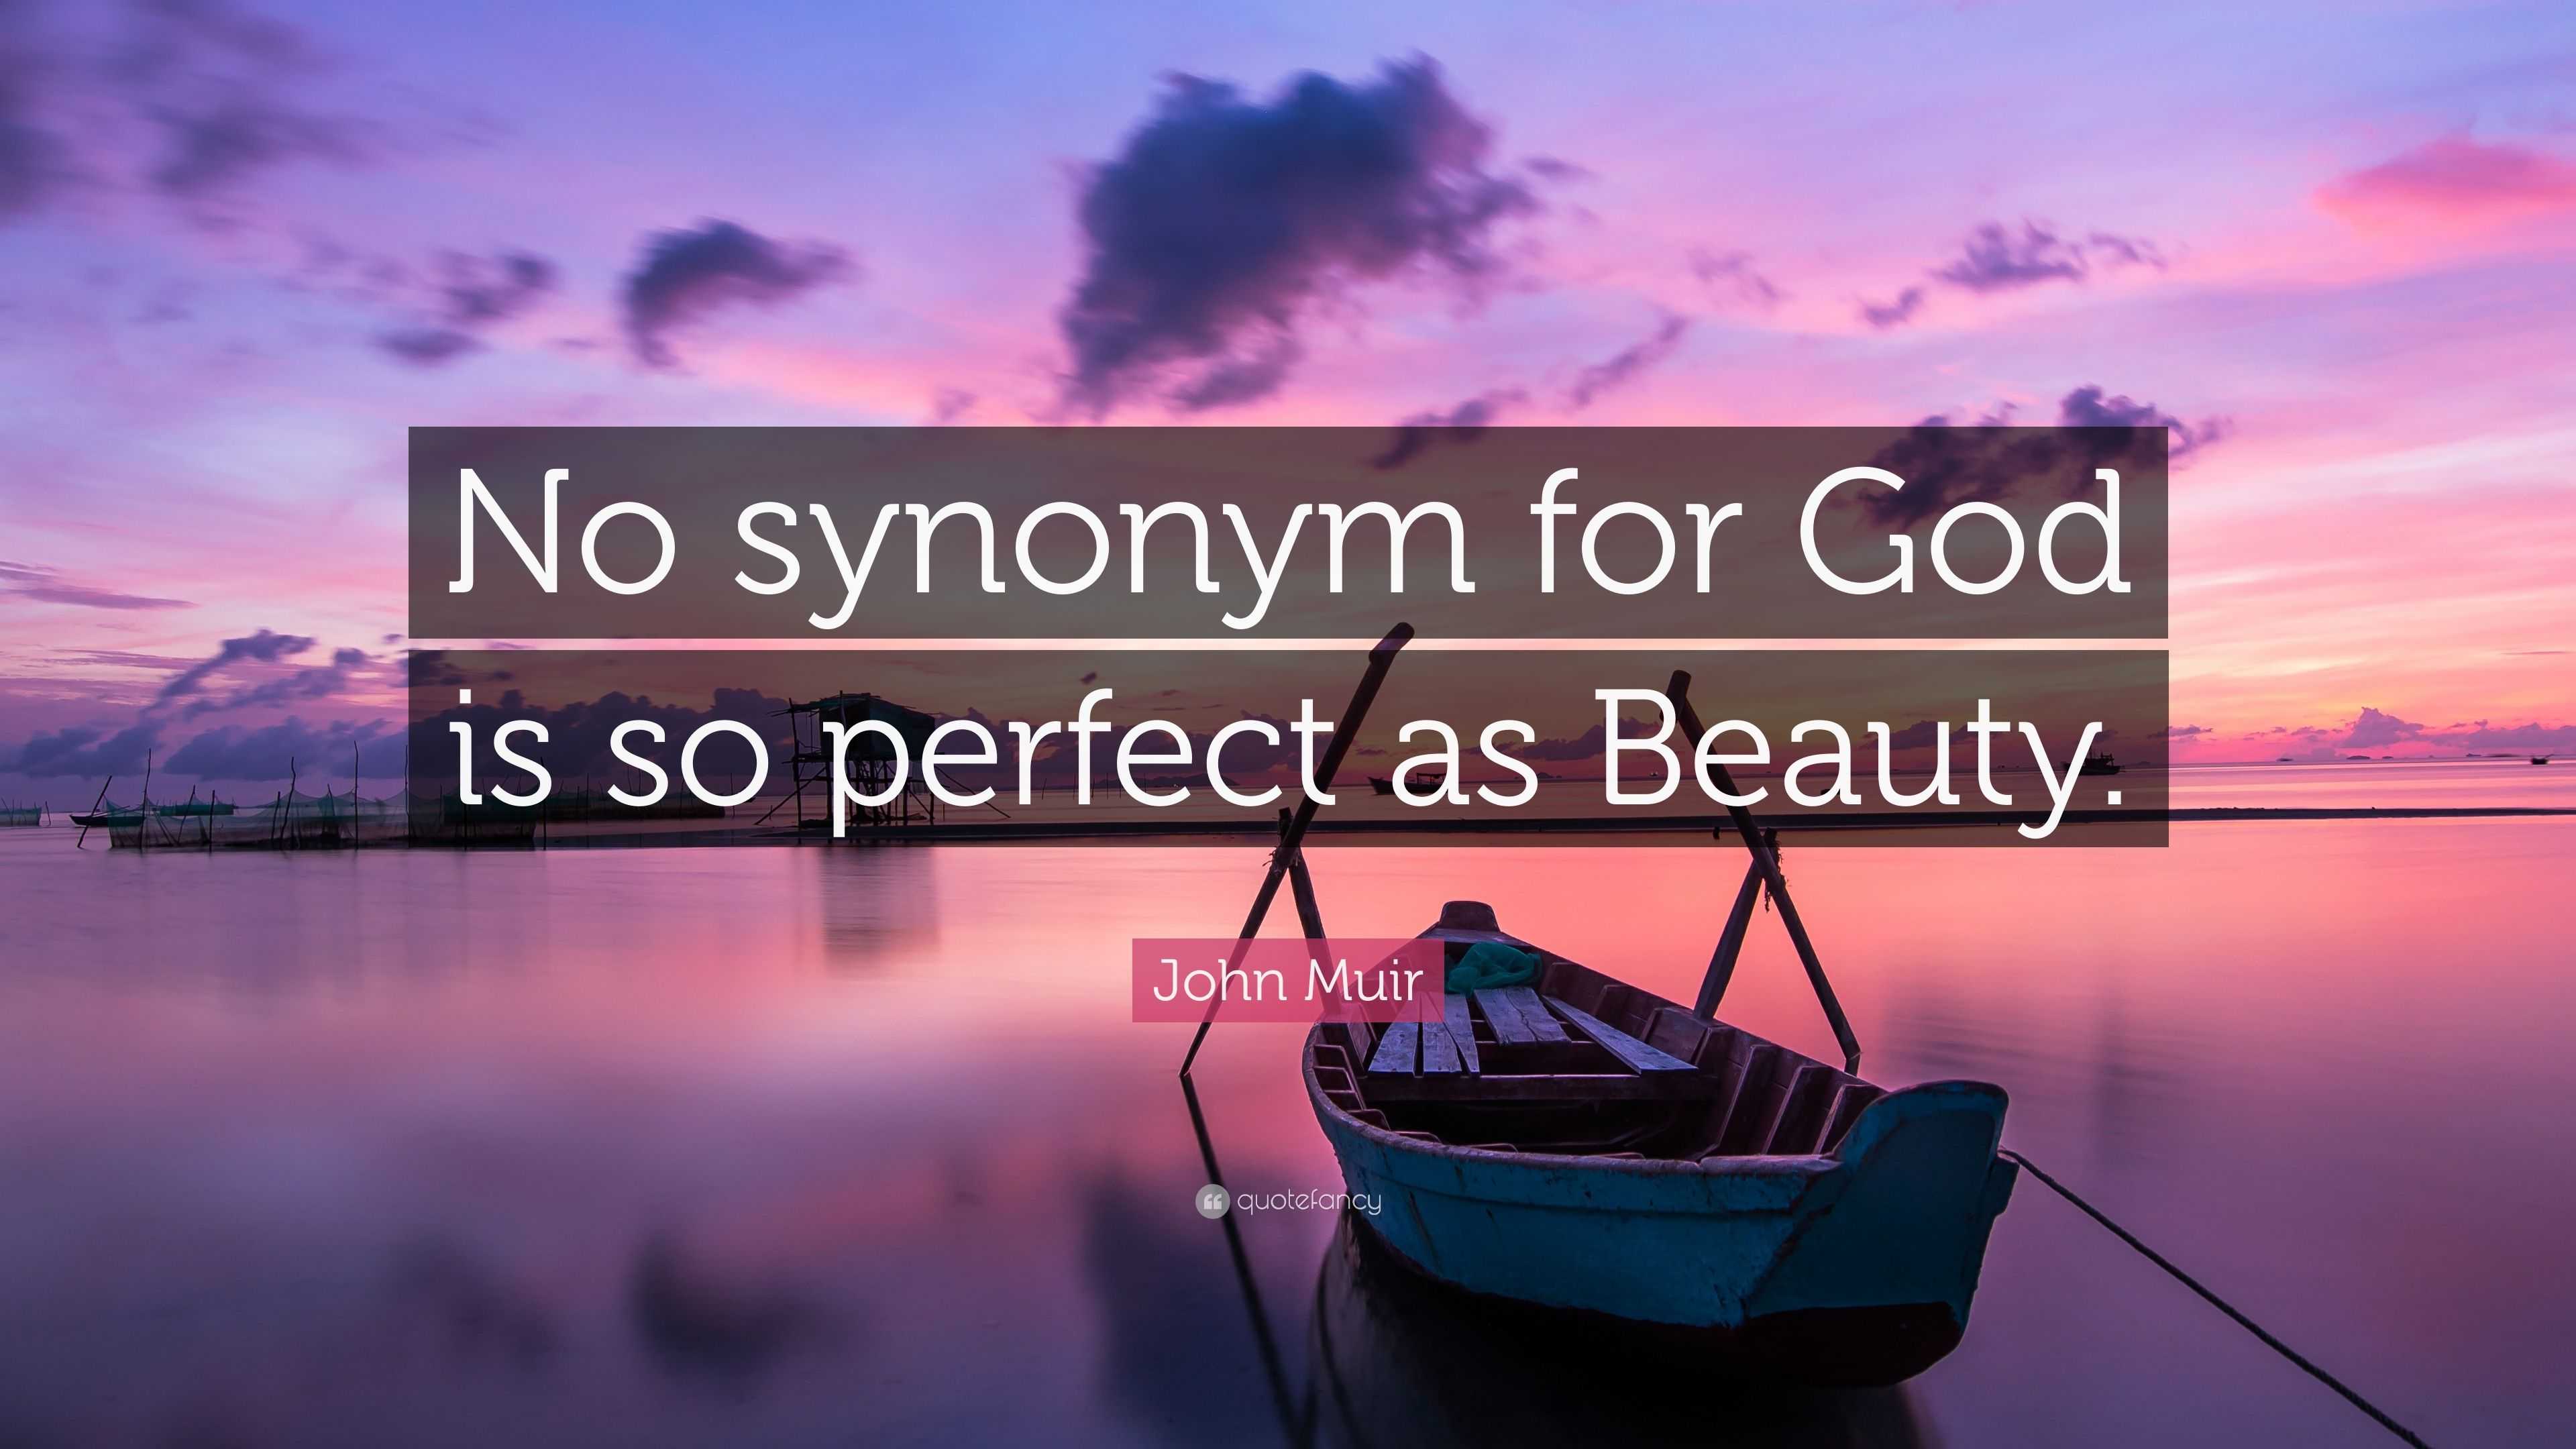 5278847 John Muir Quote No synonym for God is so perfect as Beauty